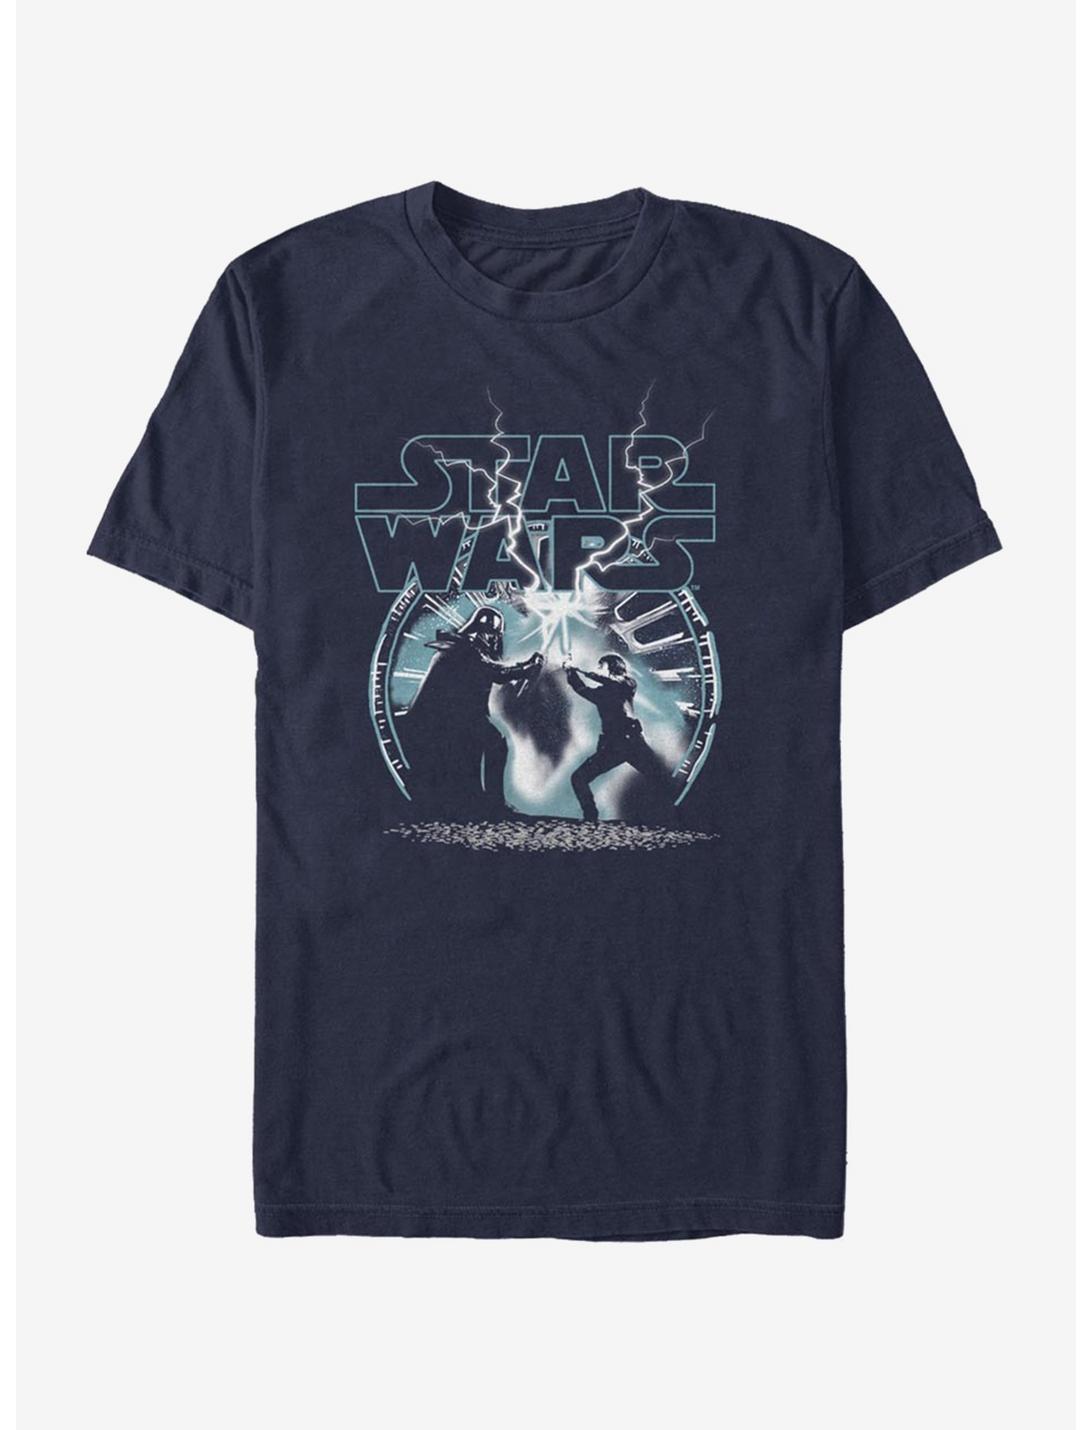 Star Wars Ultimate Fight T-Shirt, NAVY, hi-res